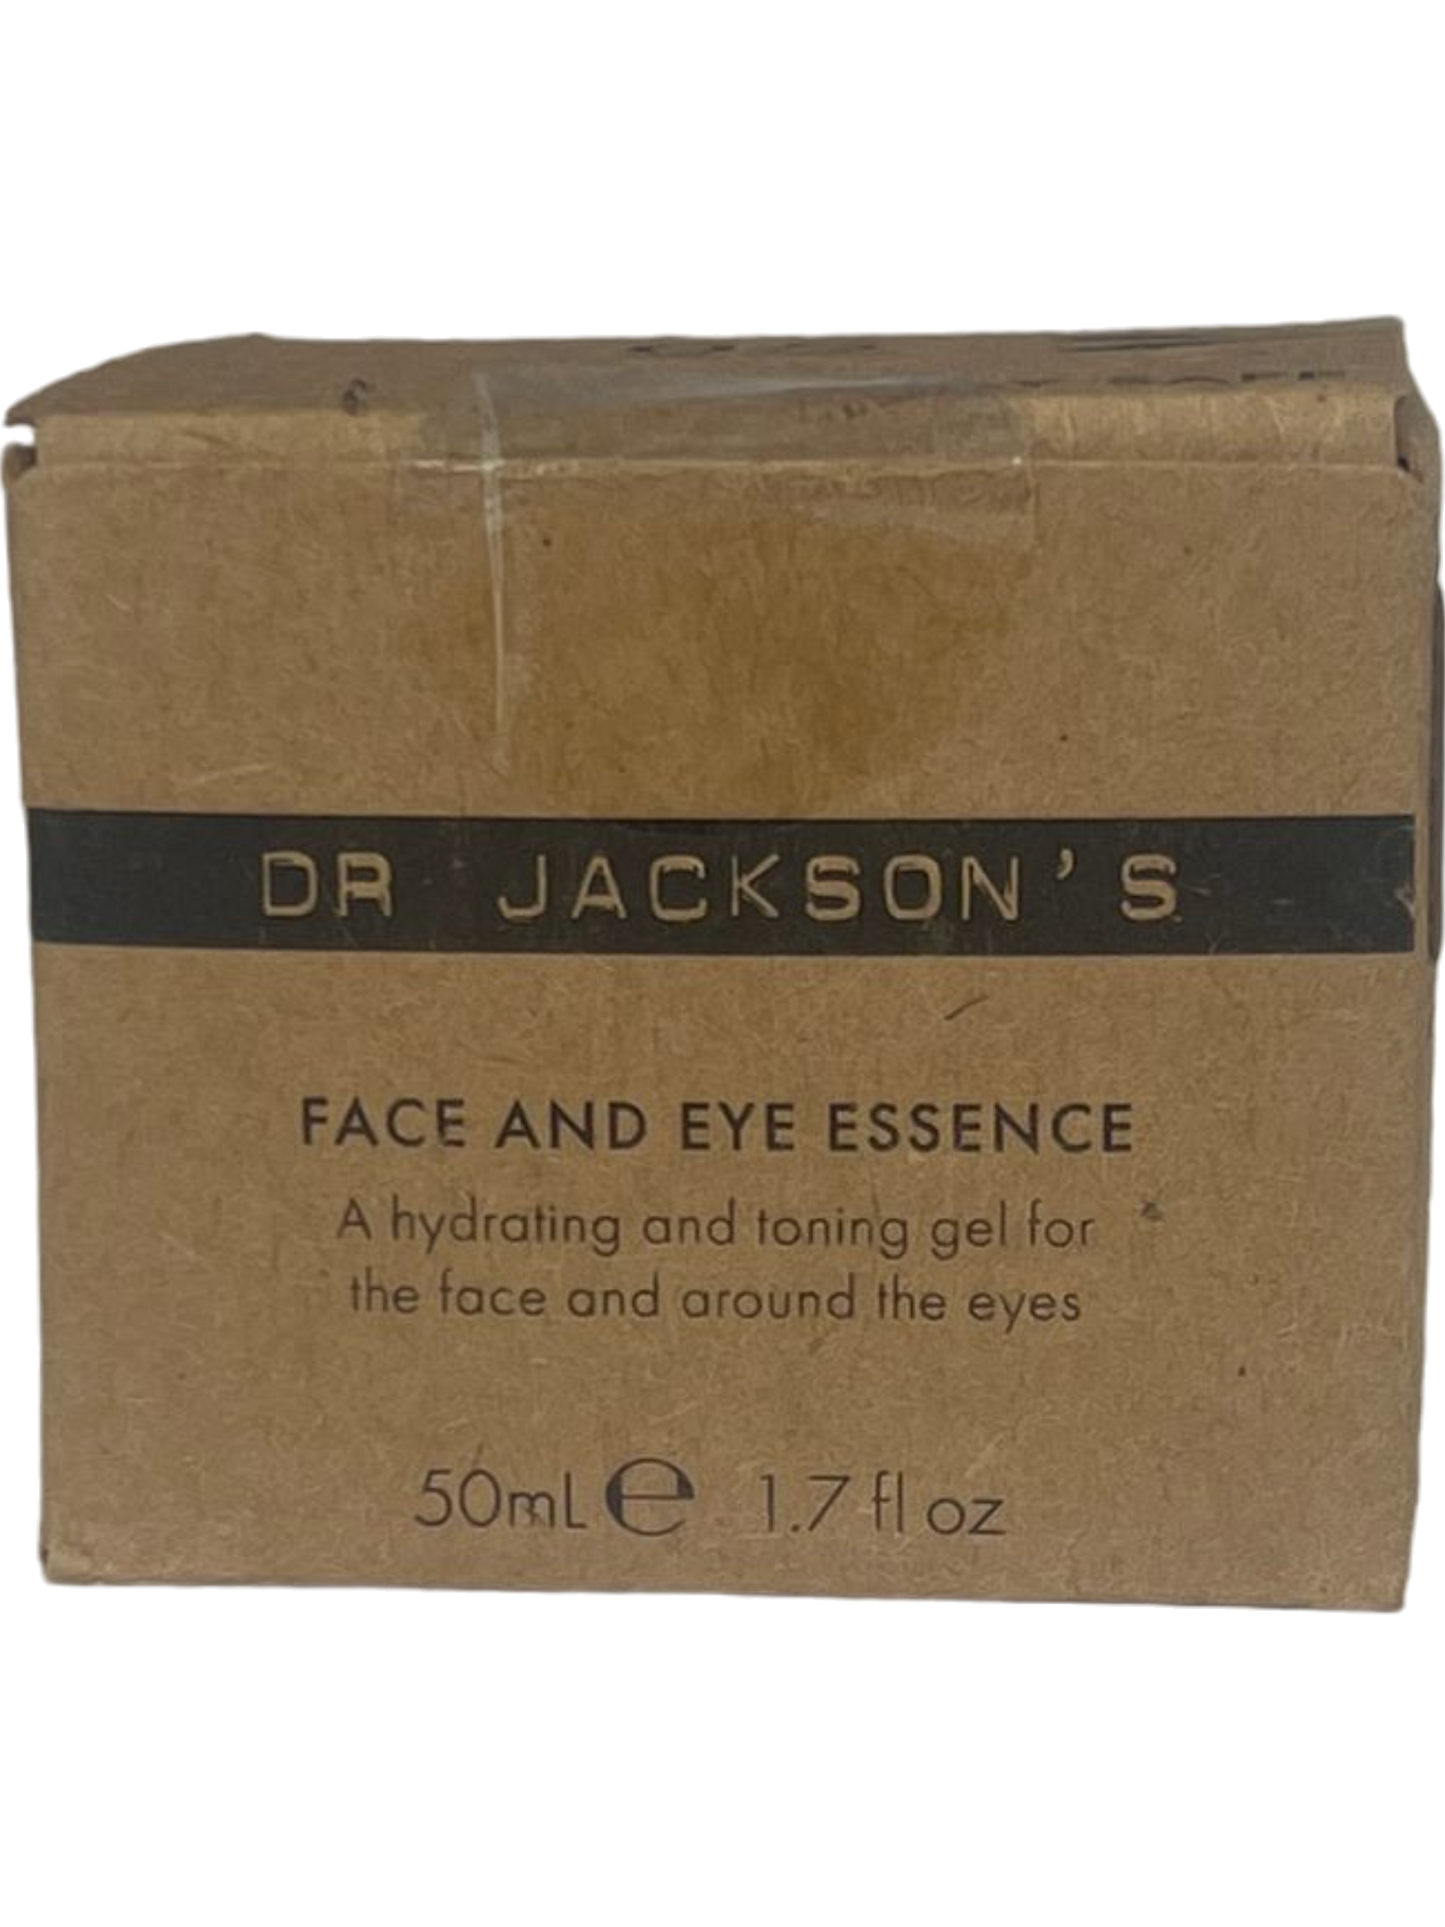 Dr Jackson's White 05 Face and Eye Essence Hydrating Toning Gel 50ml